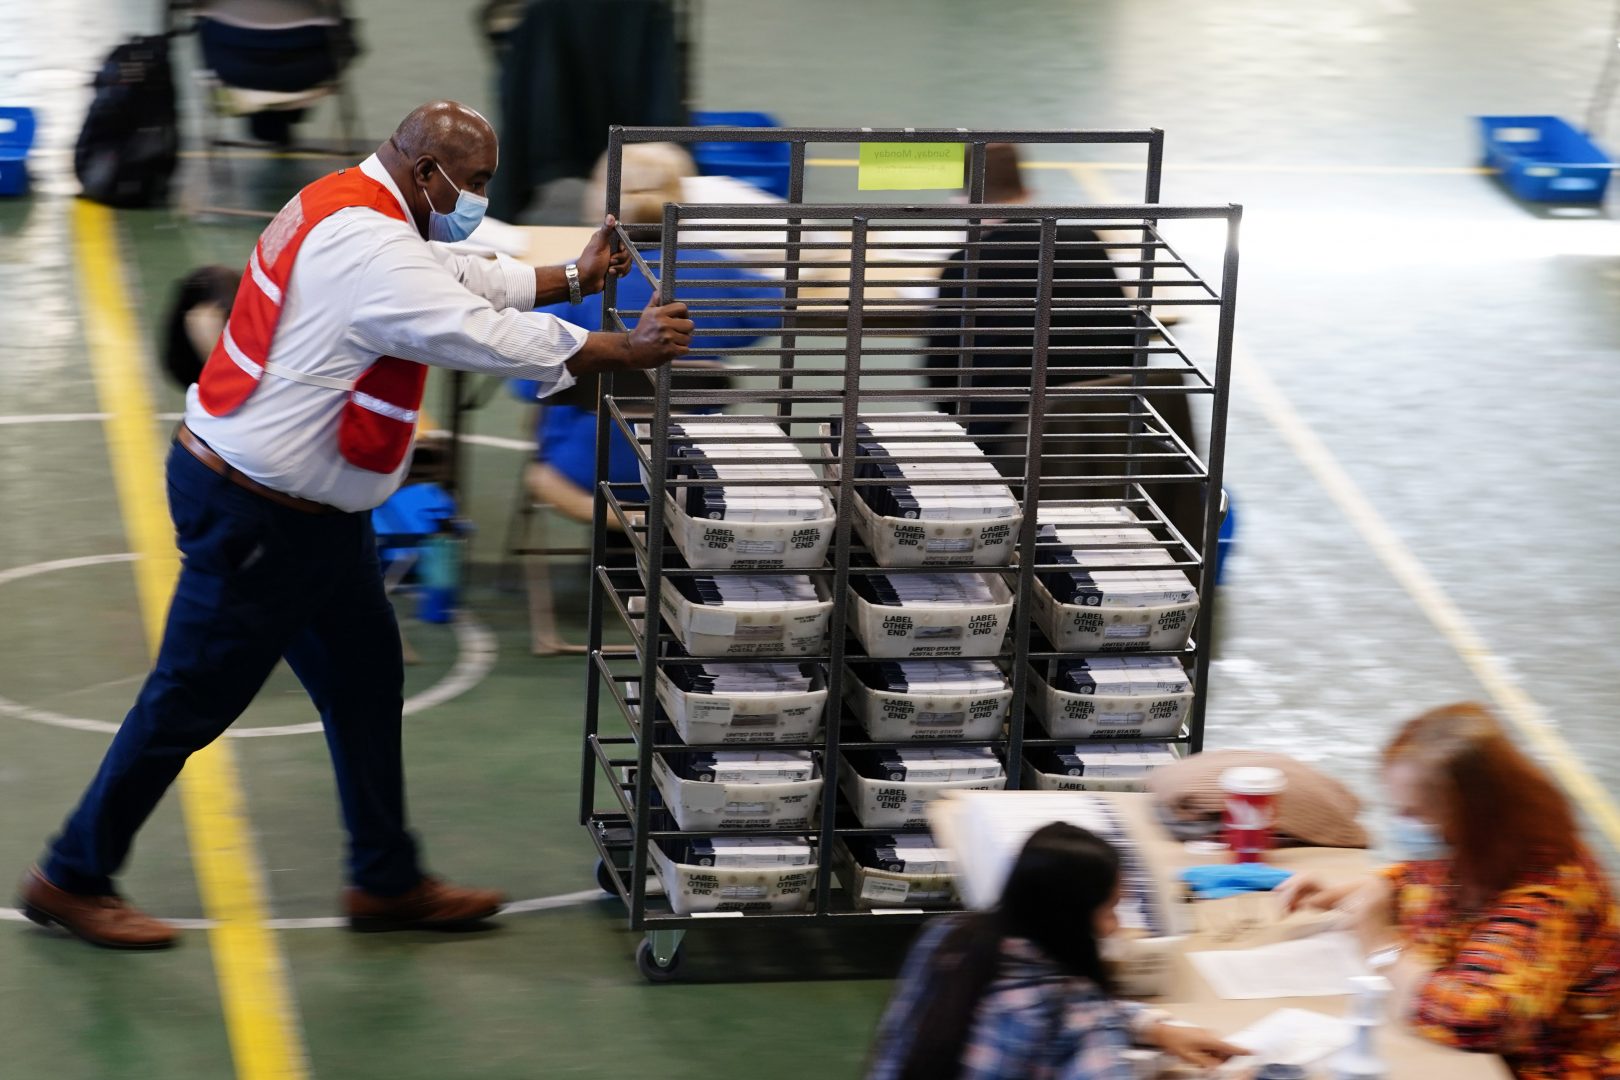 James Lyles, a Chester County election worker, pushes mail-in and absentee ballots for the 2020 general election in the United States to be processed at West Chester University, Wednesday, Nov. 4, 2020, in West Chester, Pa. 